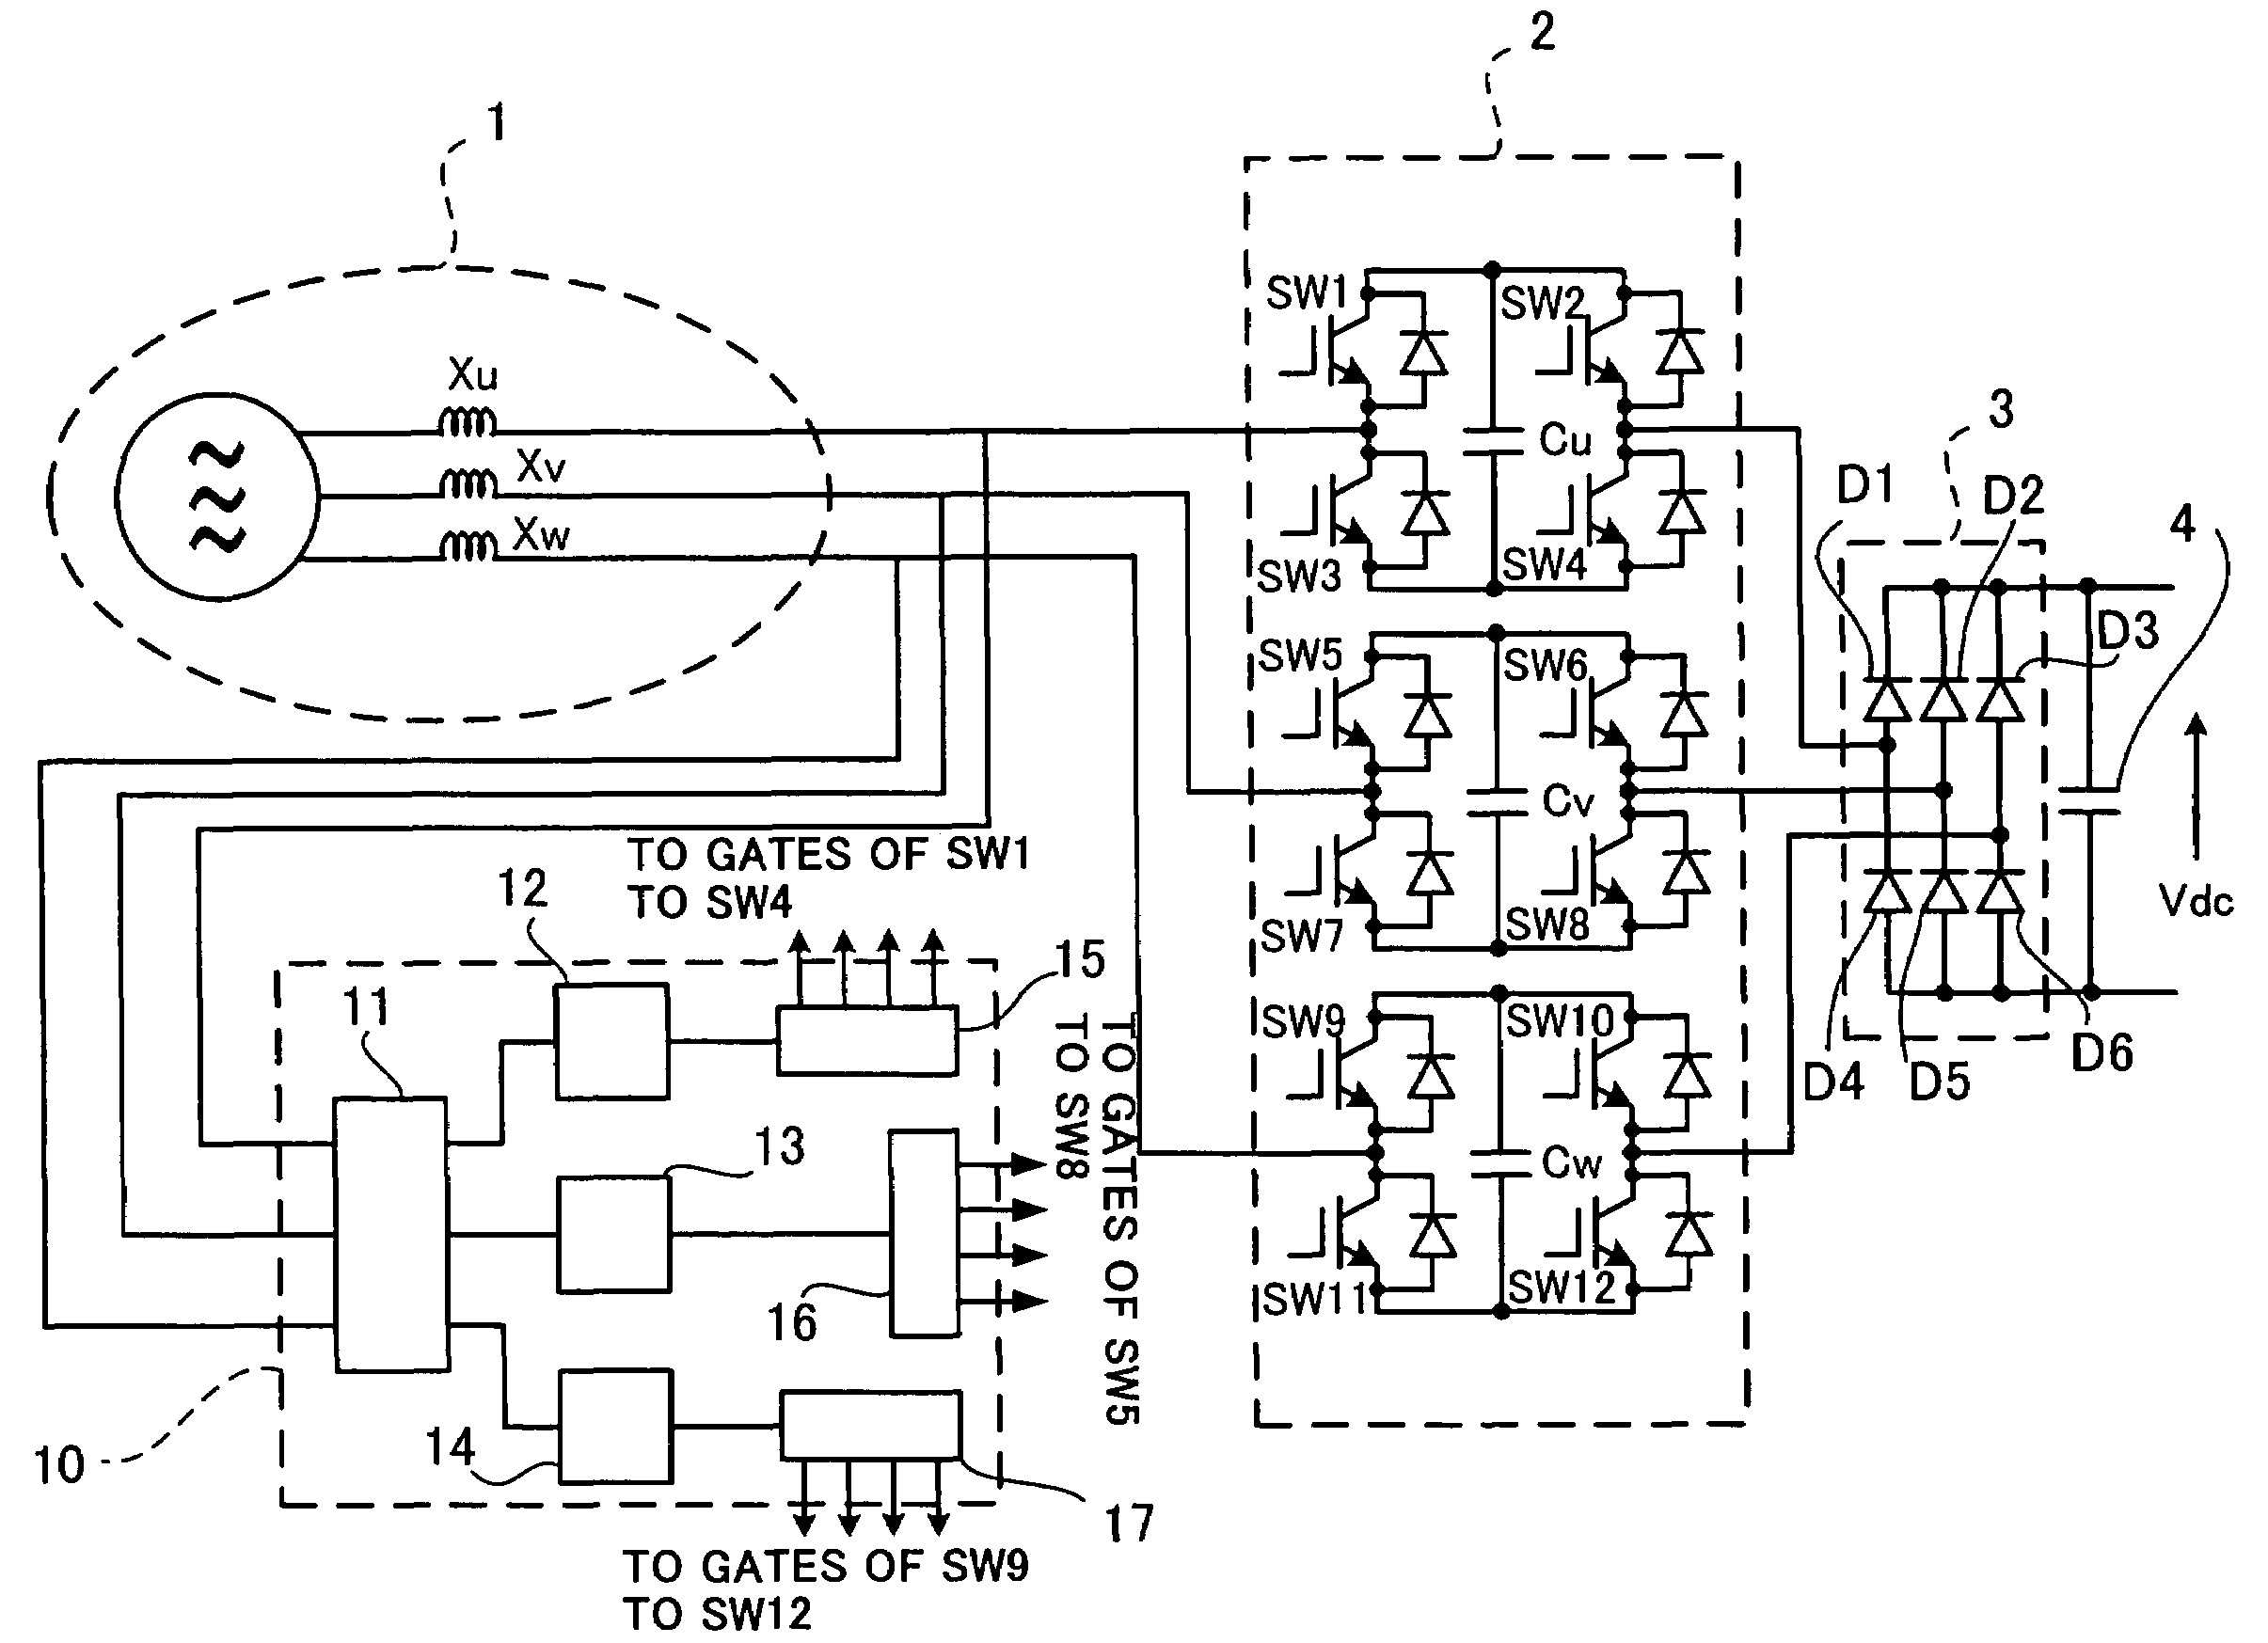 System linking apparatus for generated electric power